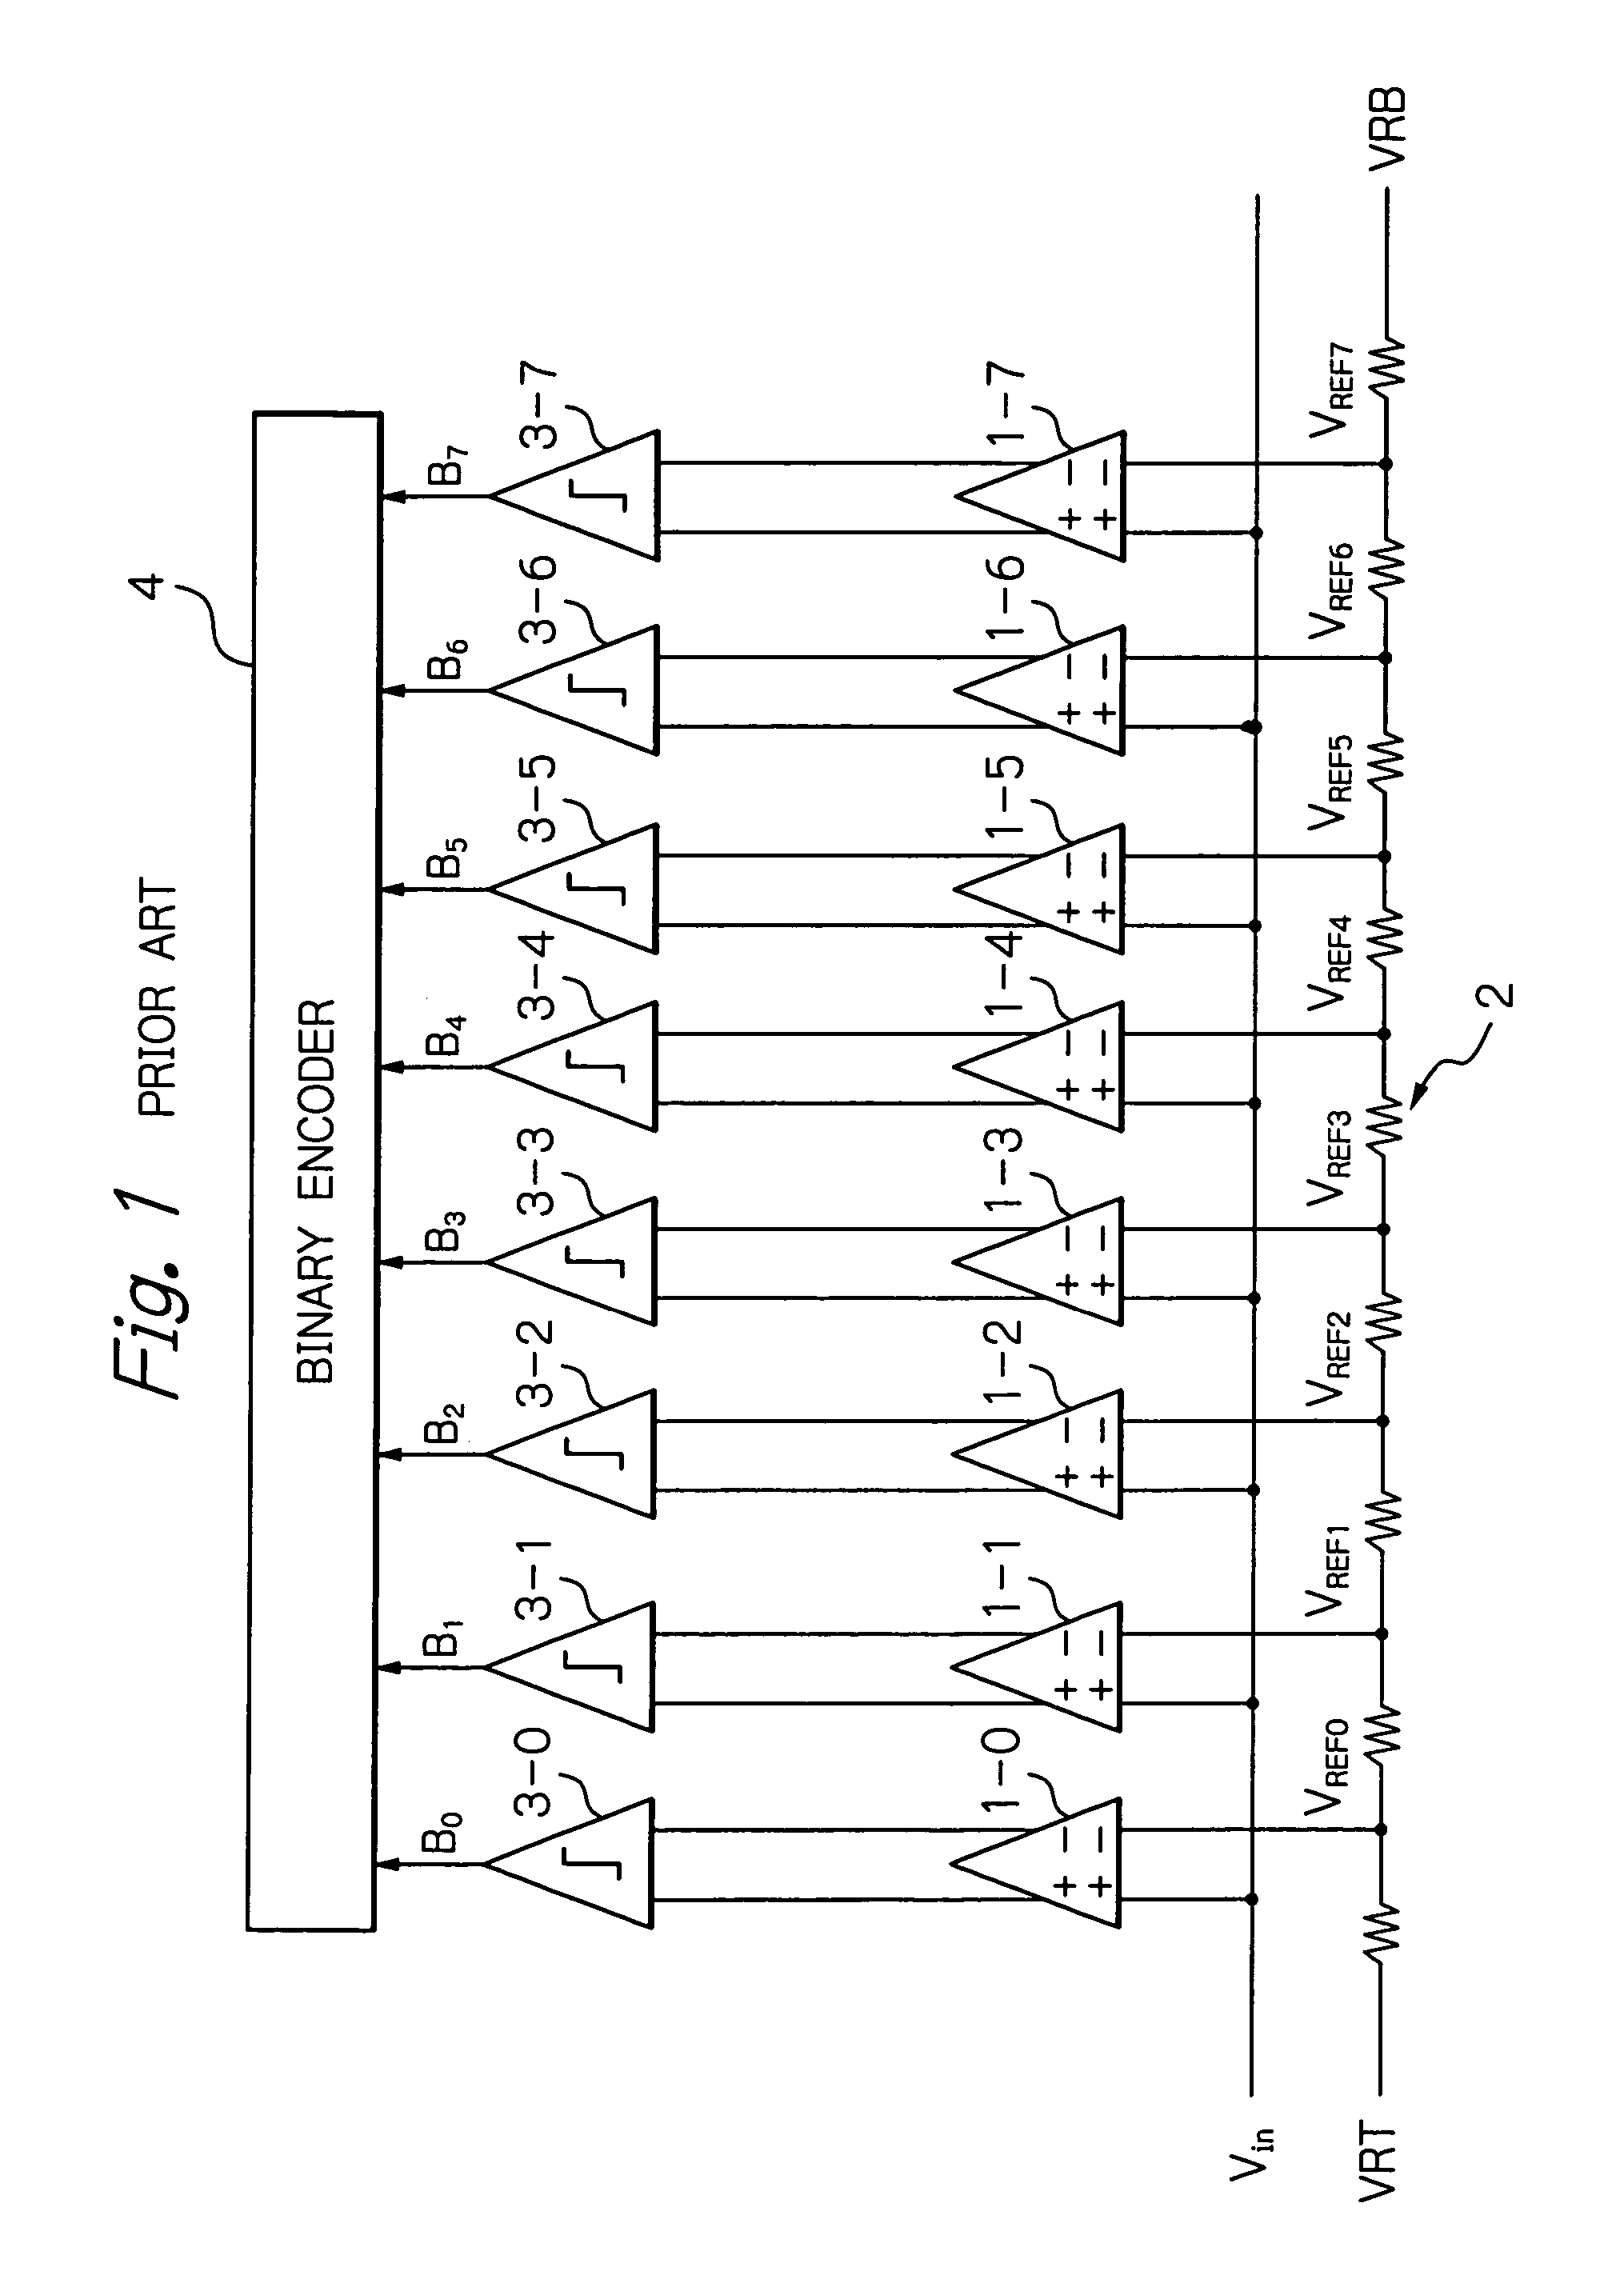 Monolithic semiconductor device capable of suppressing mismatches between repetitive cells